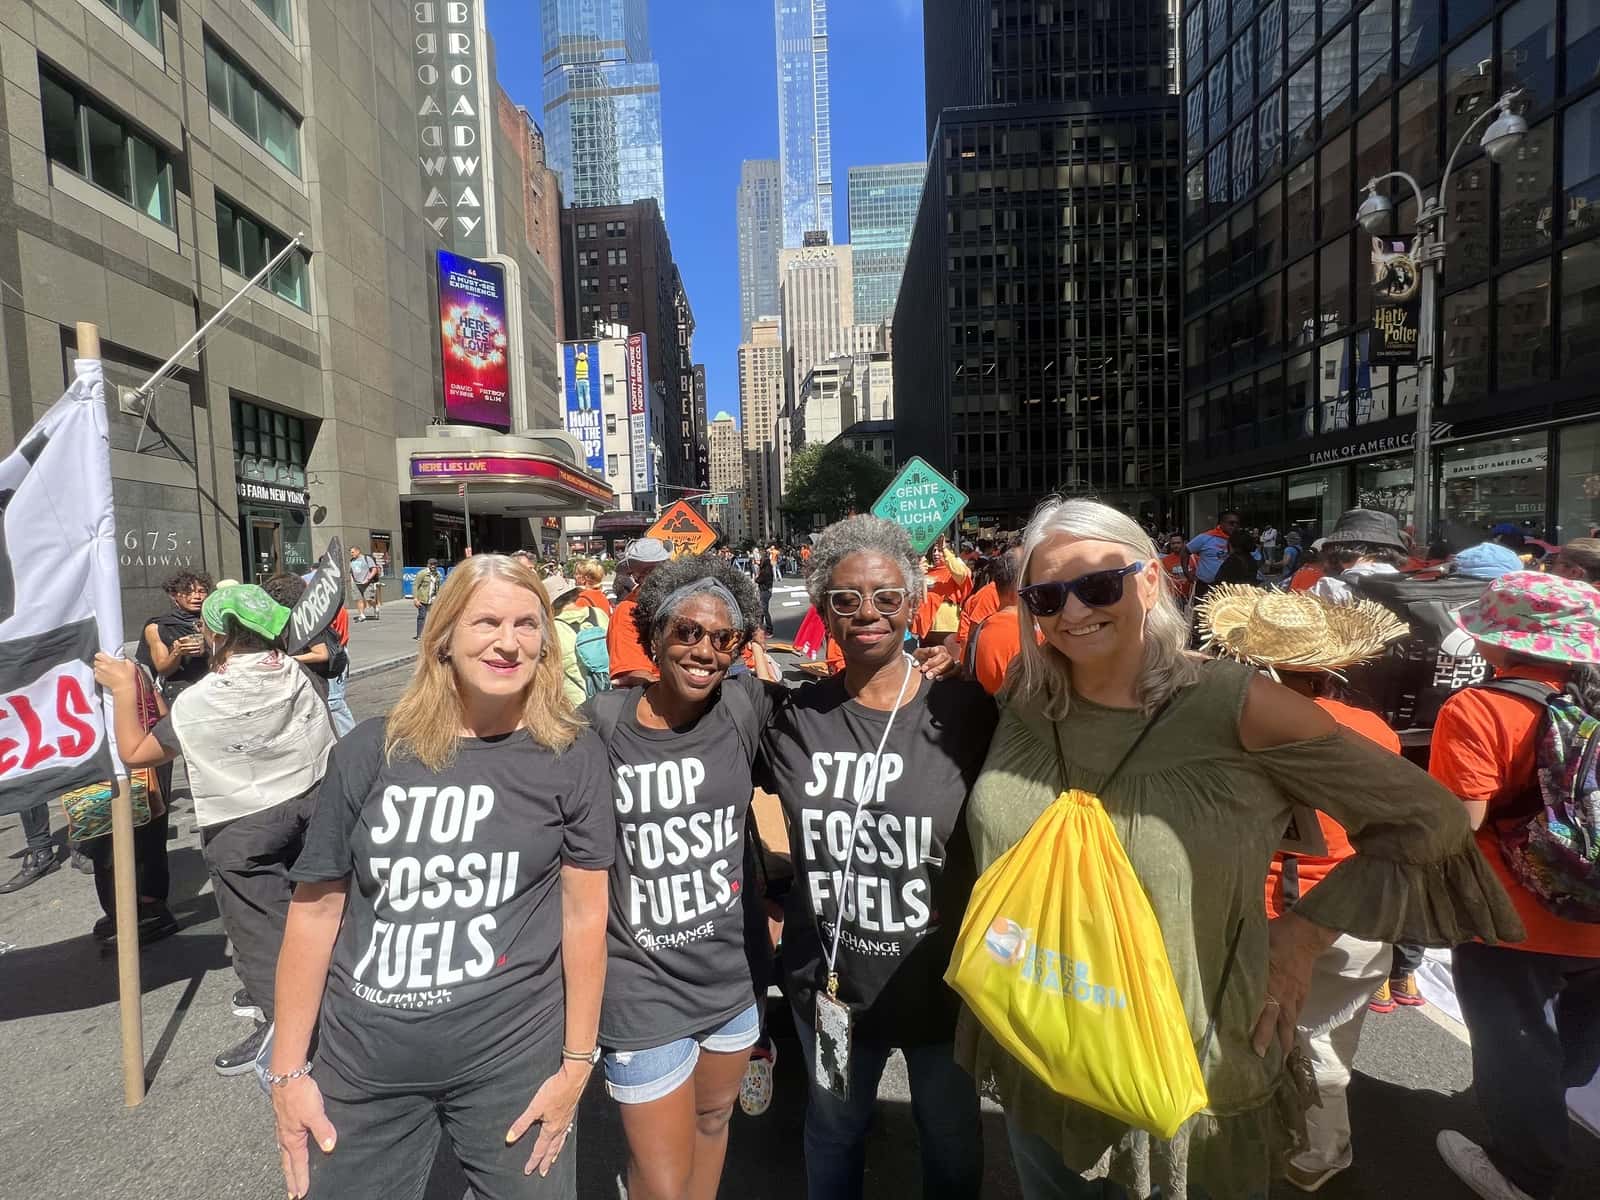 Four women stand on a city sidewalk in bright sunlight, wearing matching black t-shirts that read "Stop Fossil Fuels."